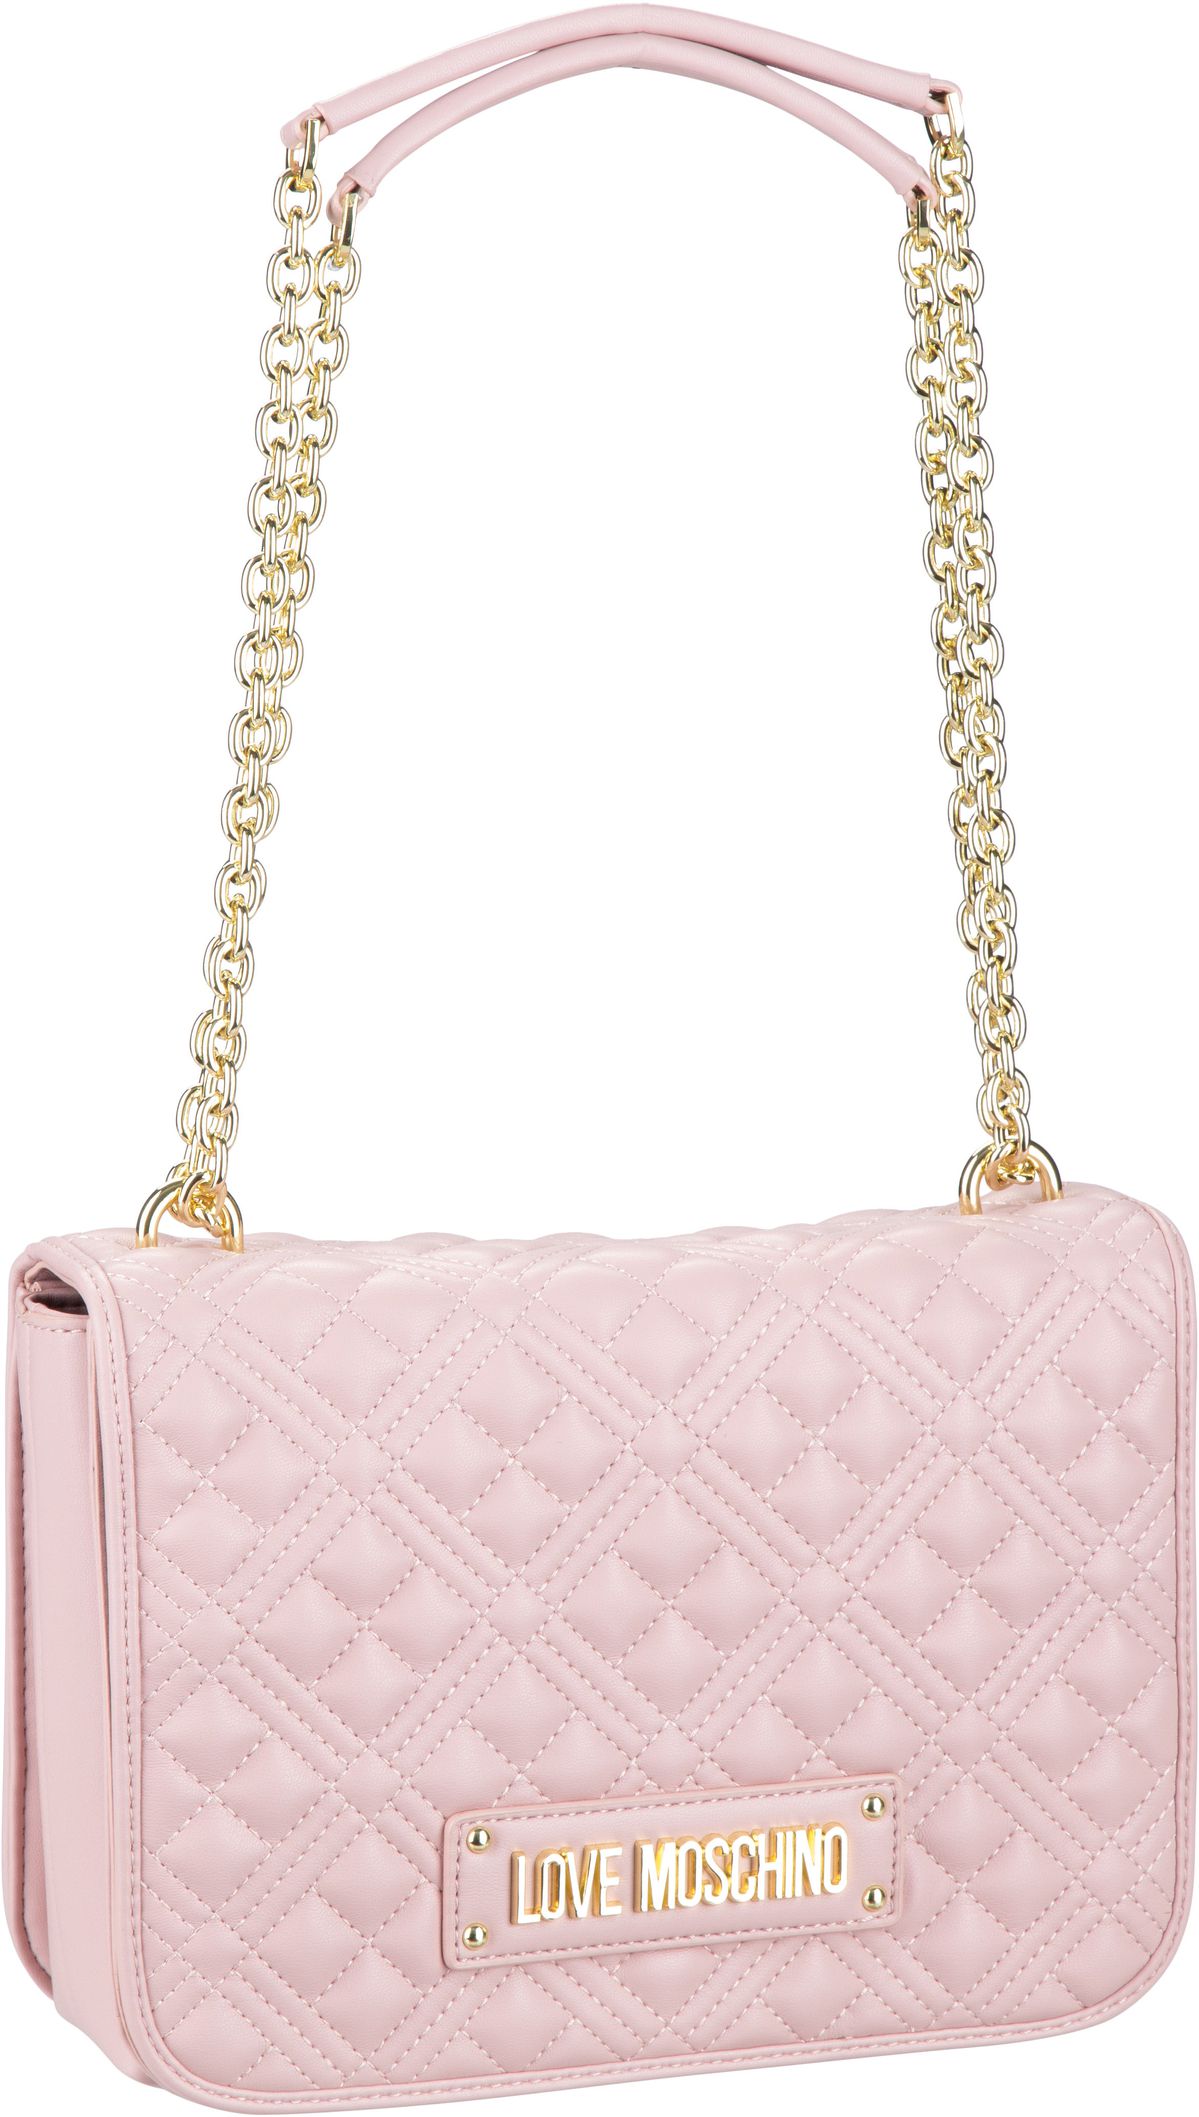 Love Moschino Quilted Bag 4000 - Pink